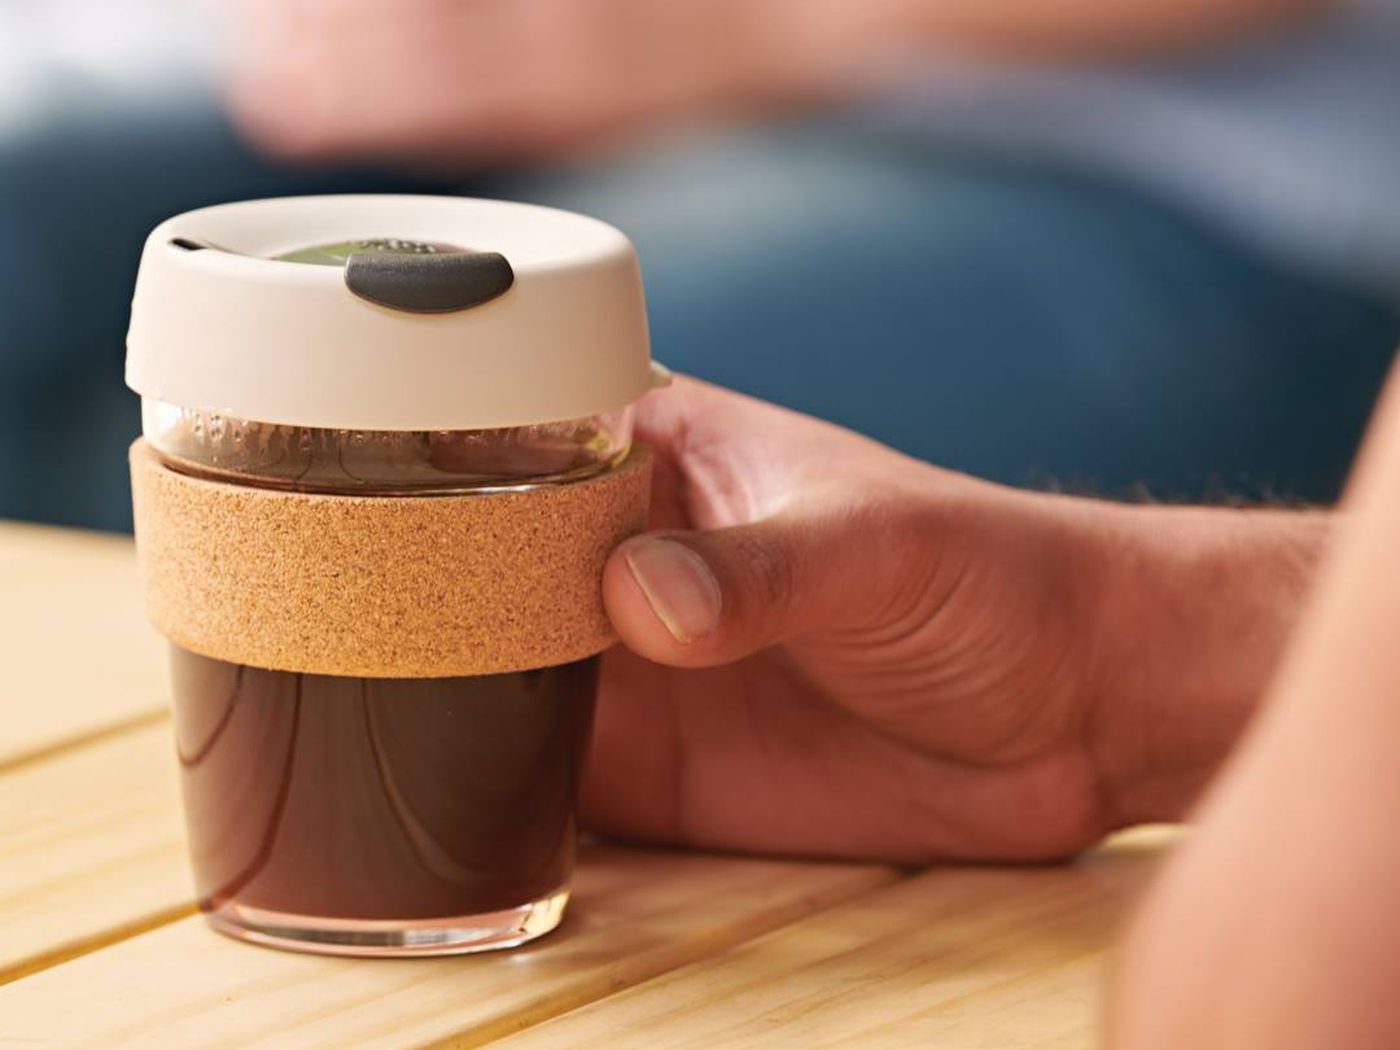 Advantages Of Using A Reusable Coffee Cup